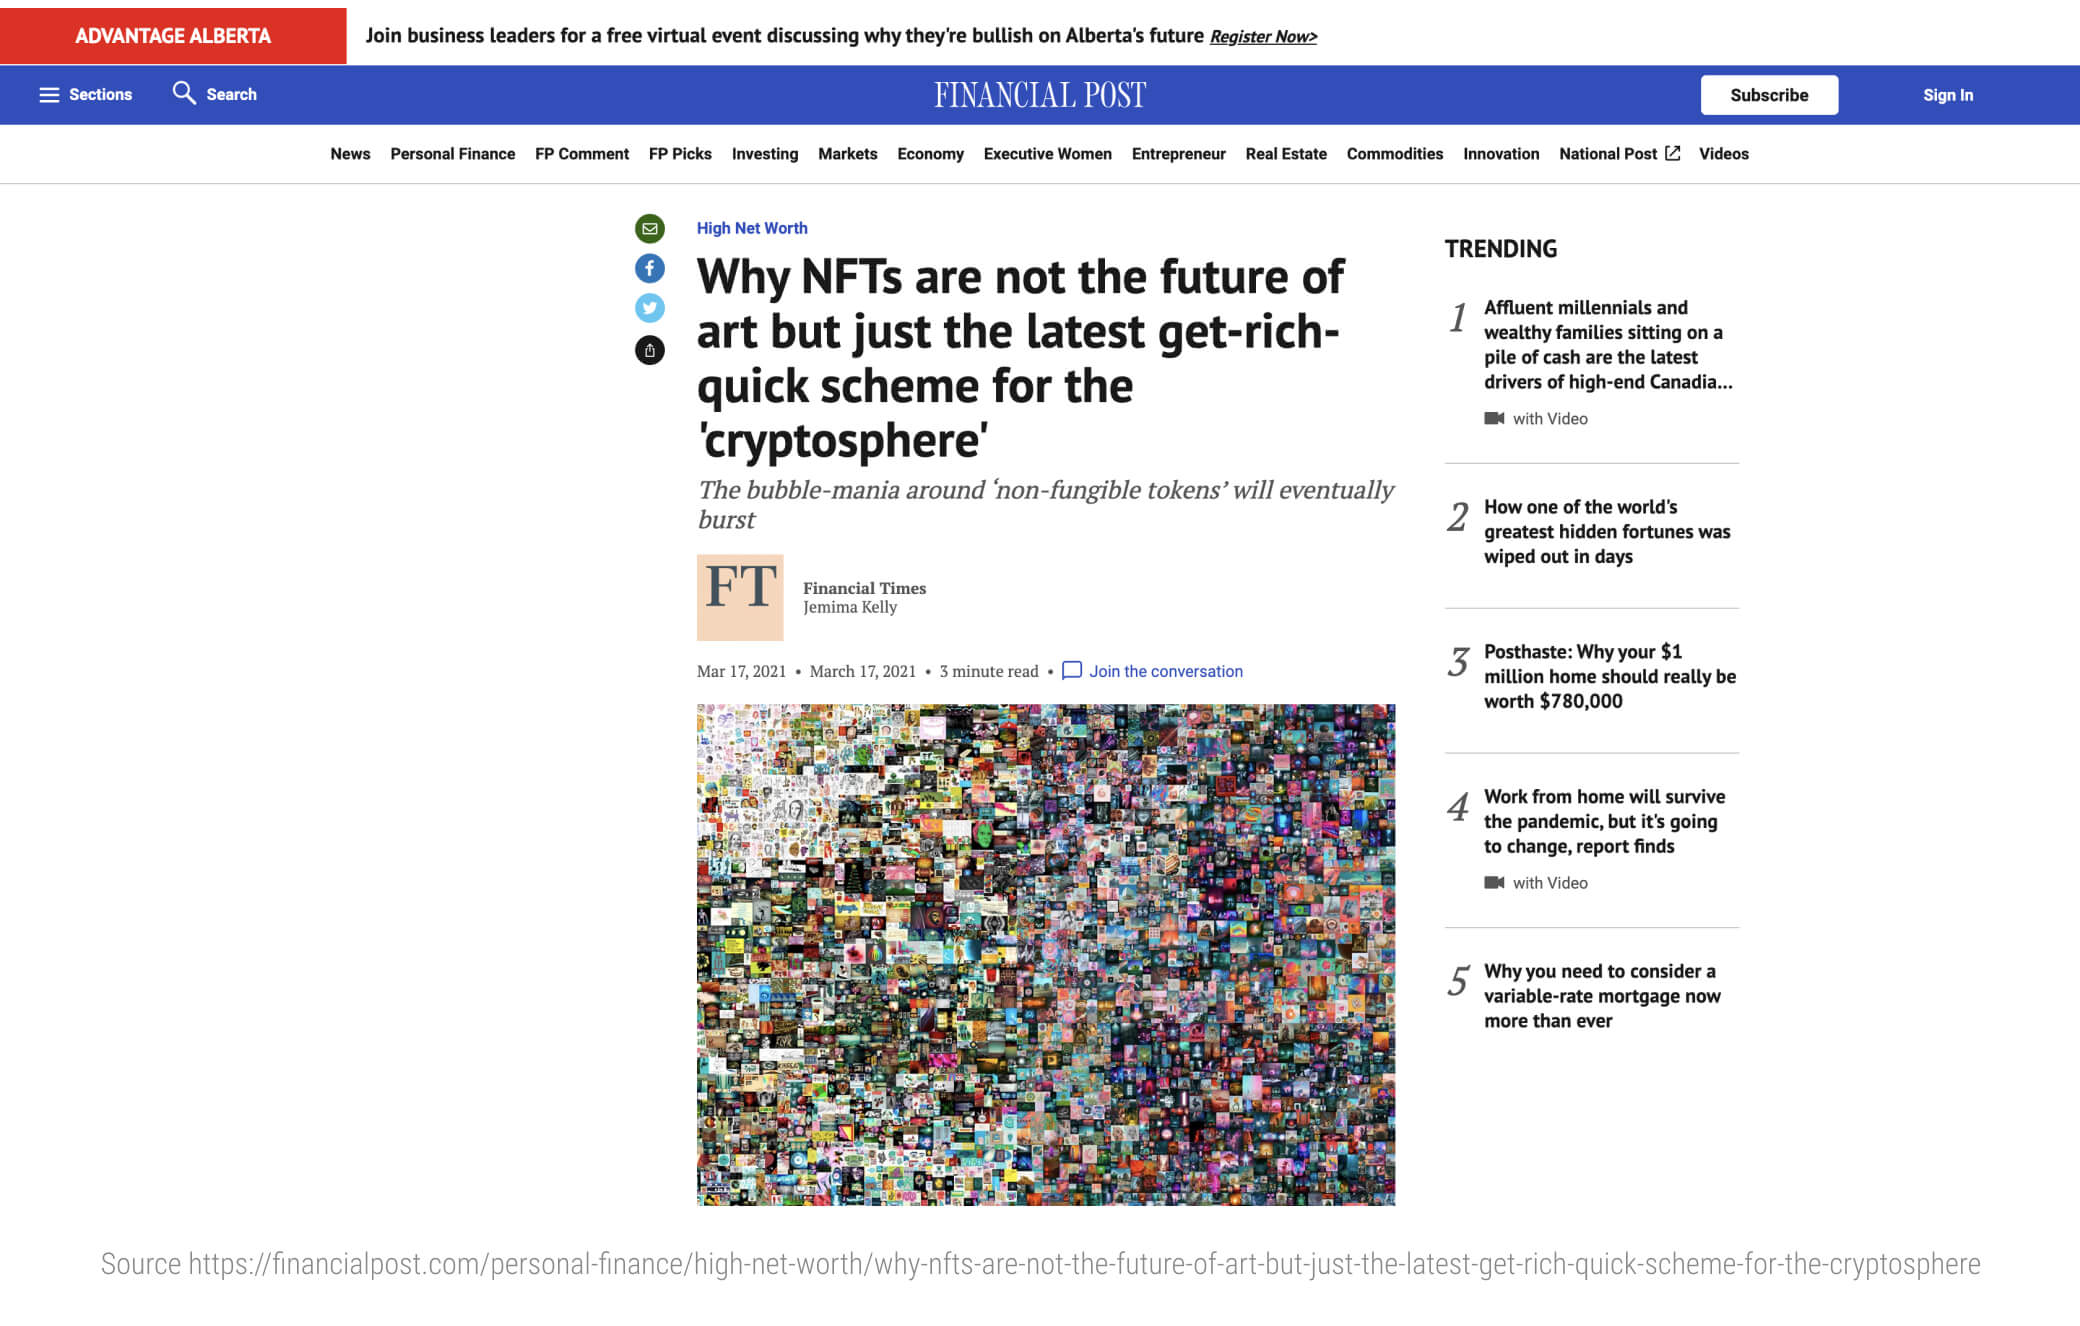 Why-NFTs-are-not-the-future-of-art-but-just-the-latest-get-rich-quick-scheme-for-the--cryptosphere-